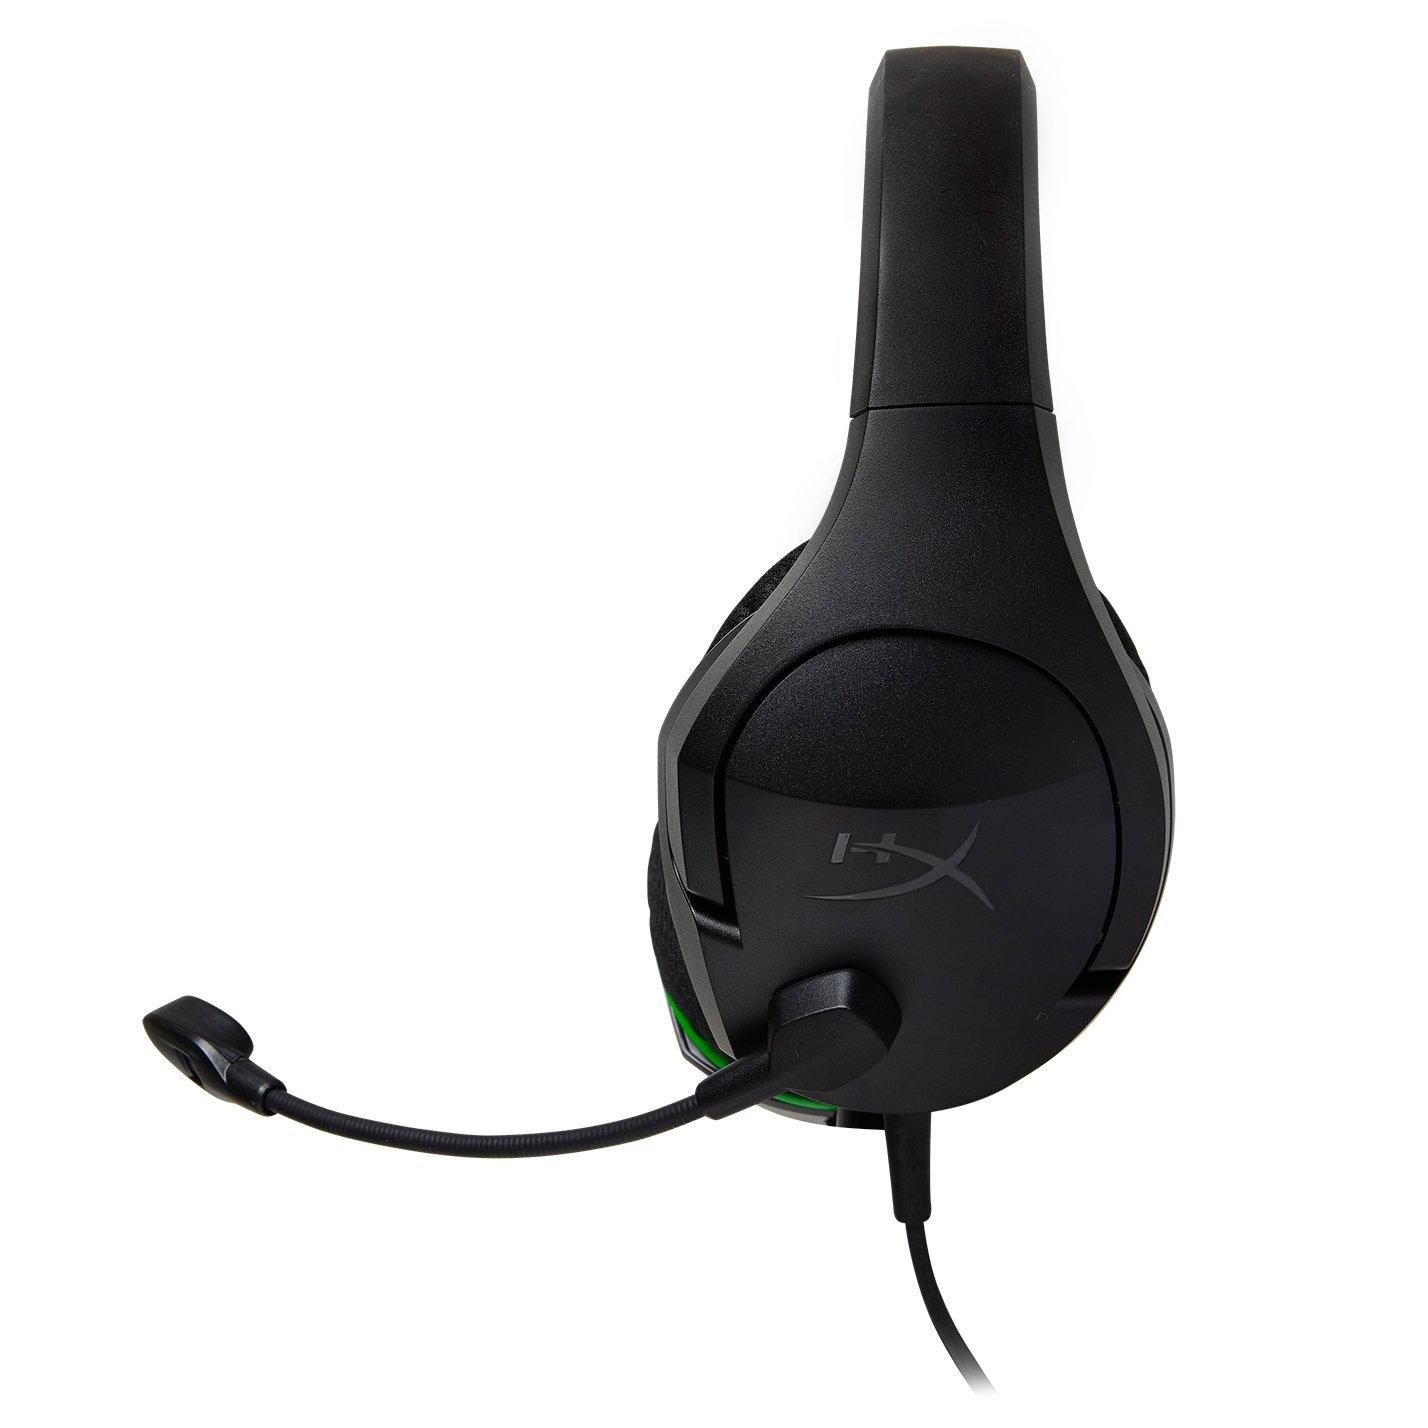 xbox one cloudx wired gaming headset